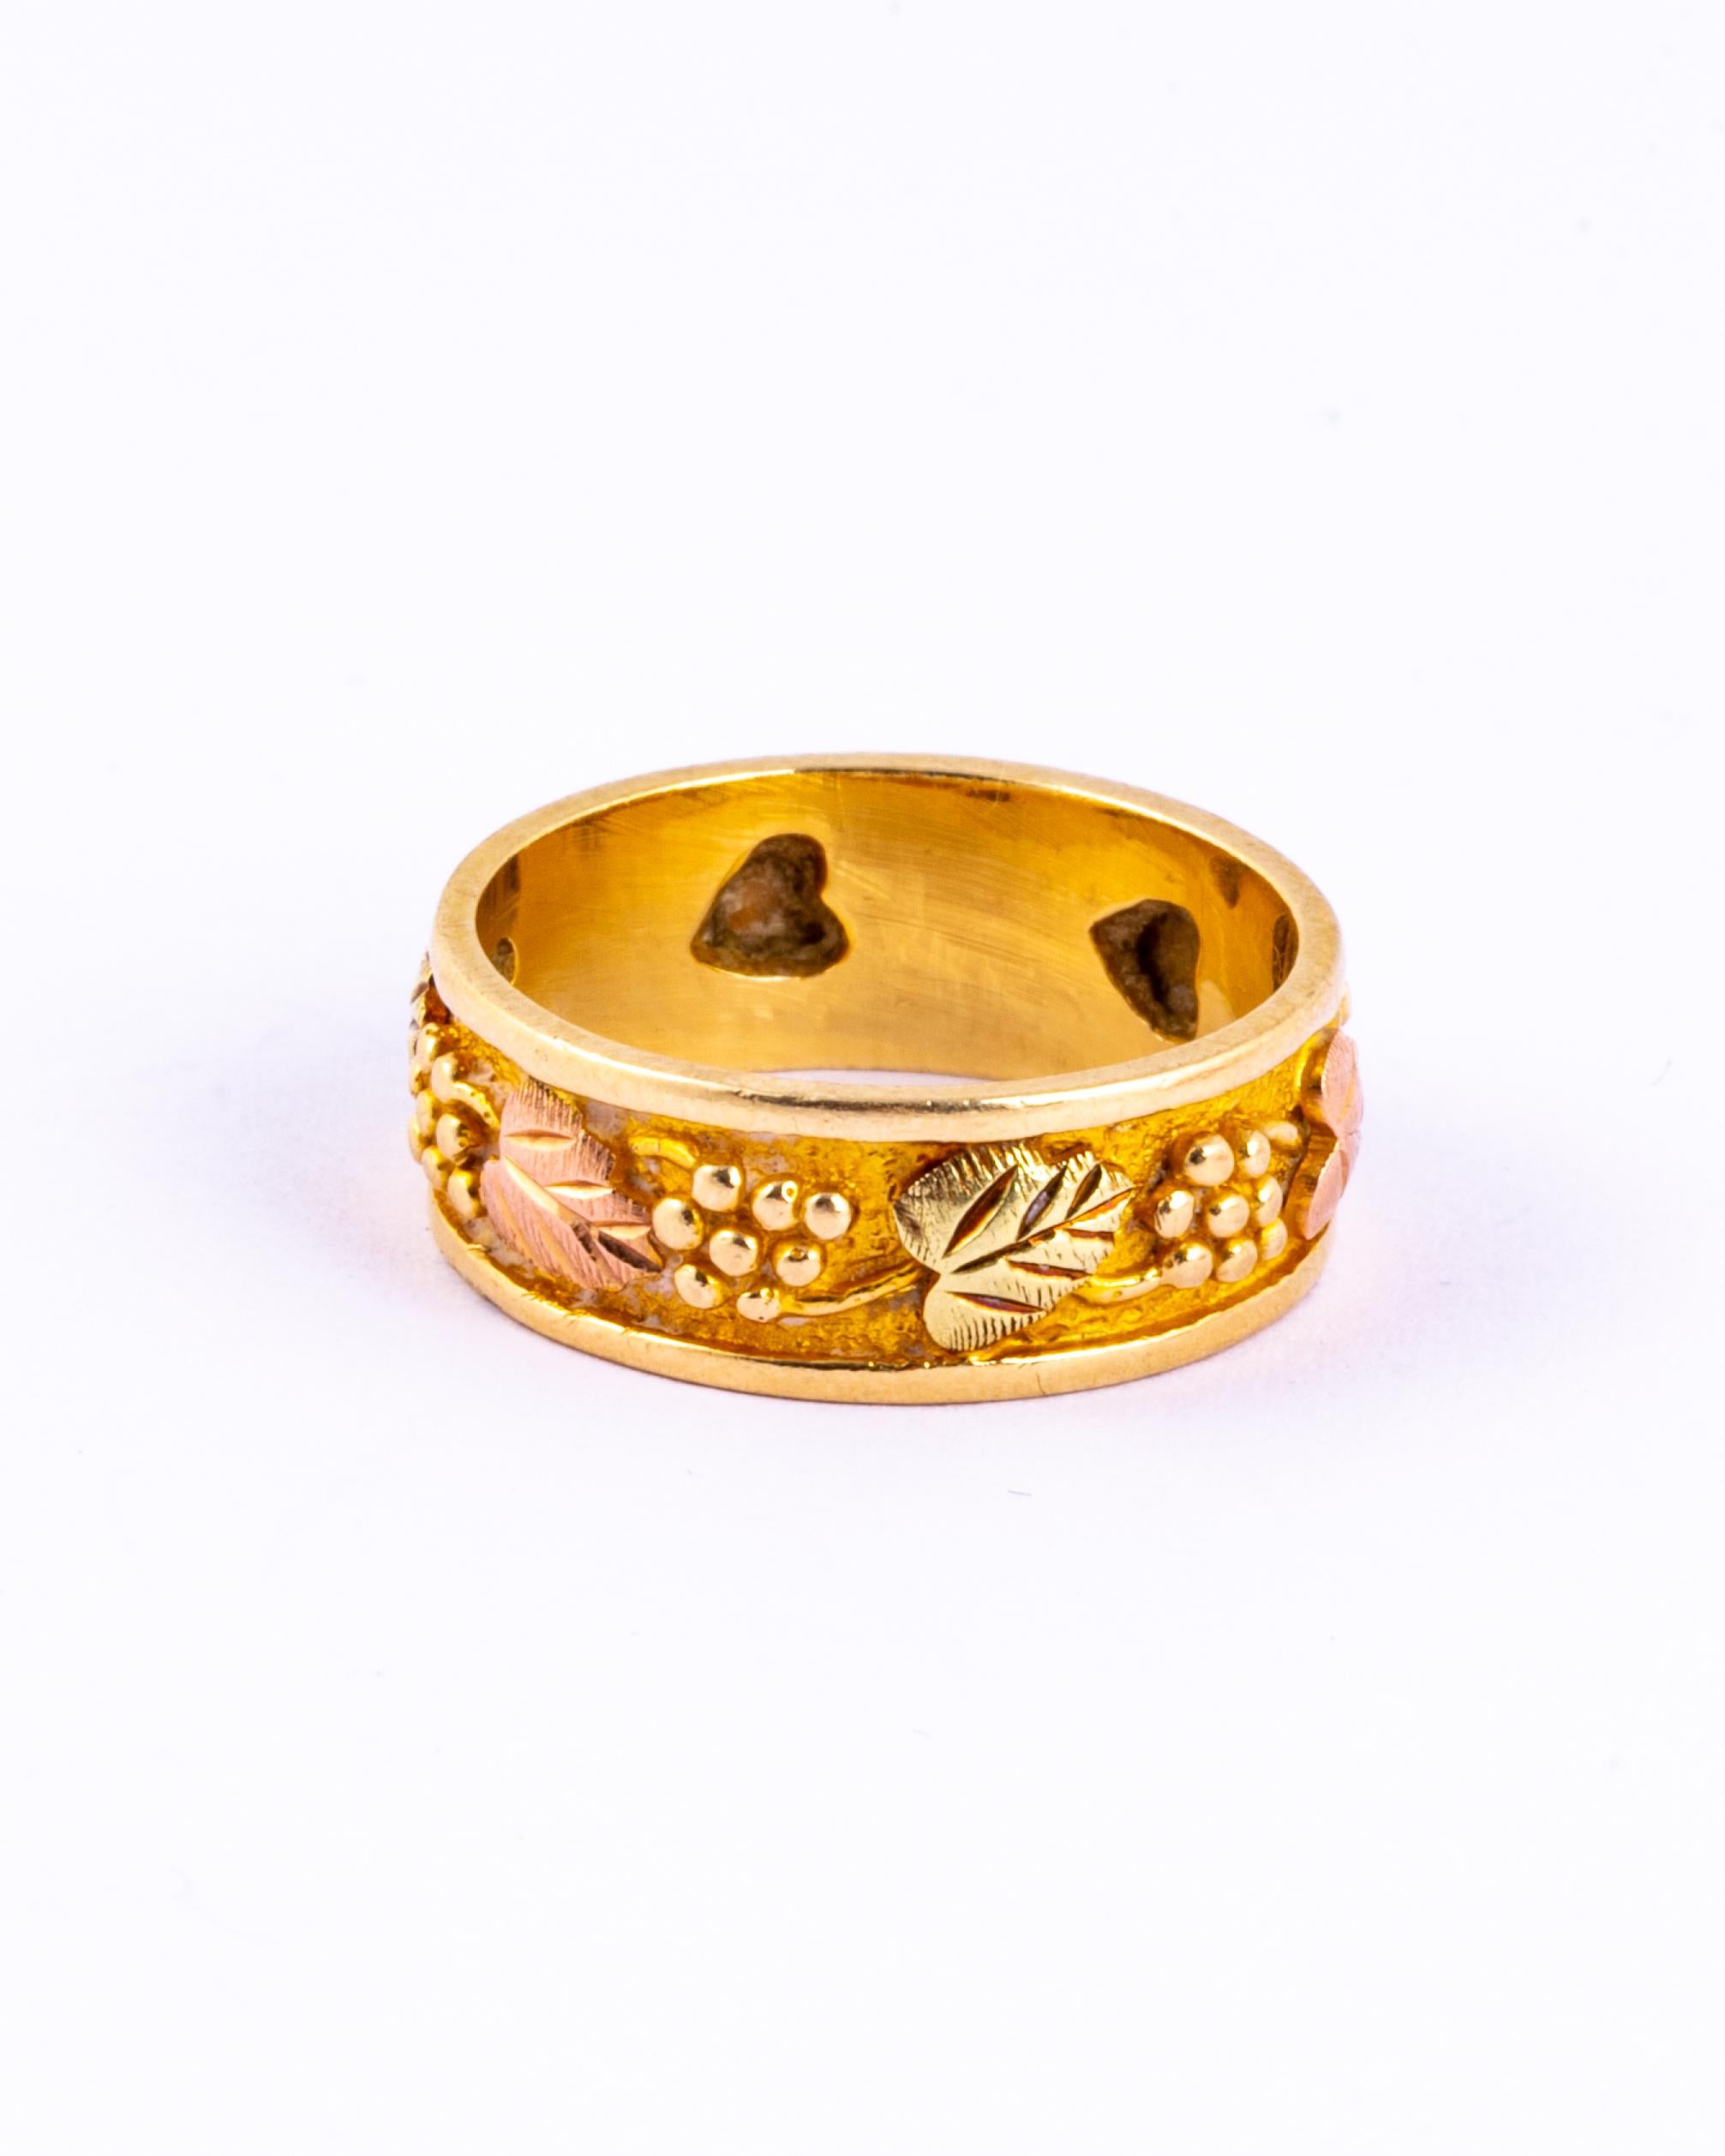 Wrapped around this gorgeous 14ct gold band is a carved pattern of leaves and berries on a textured background. There are three of these leaves that have a rose gold overlay. 

Ring Size: O 1/2 or 7 1/2 
Band Width: 7mm

Weight: 5.58g